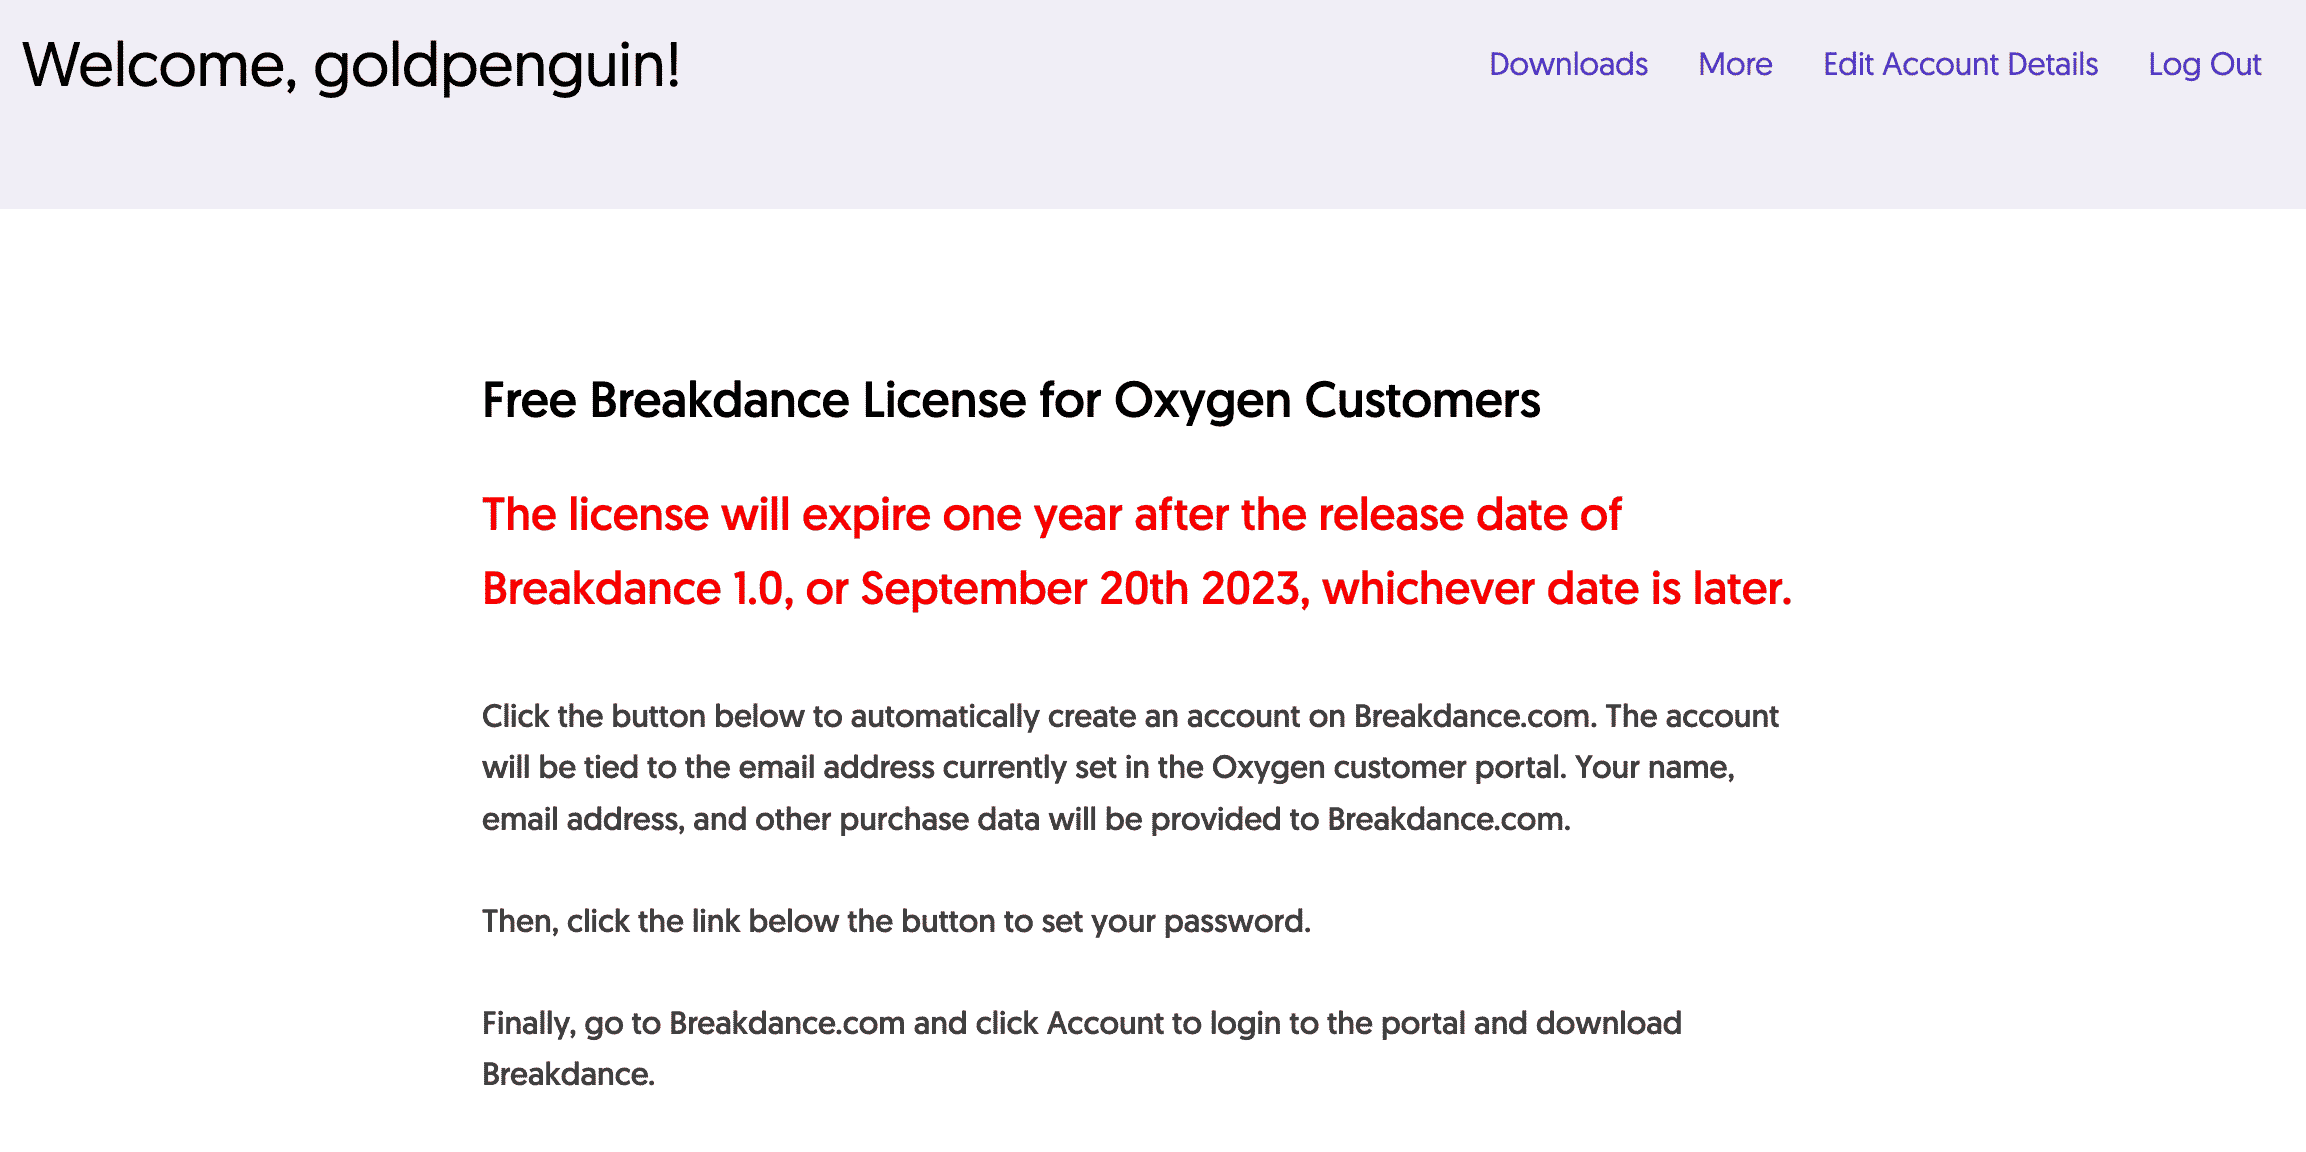 instructions to get a free breakdance license for a year, if you have a current oxygen builder license.